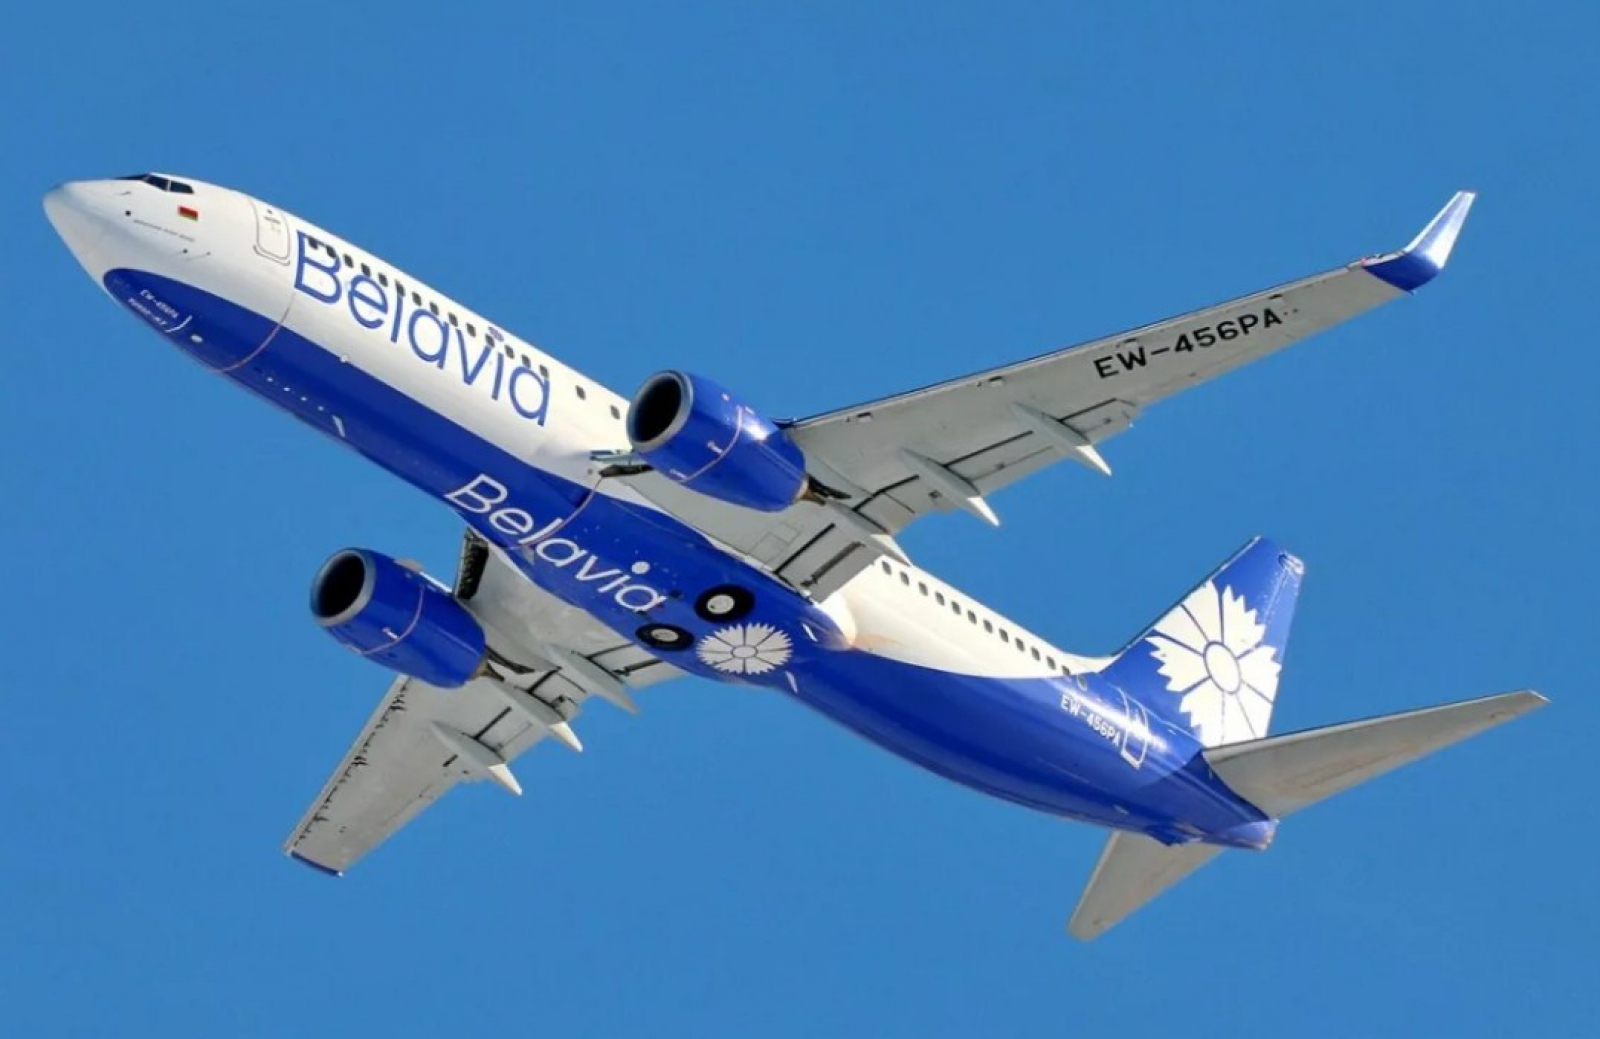 Belavia airlines